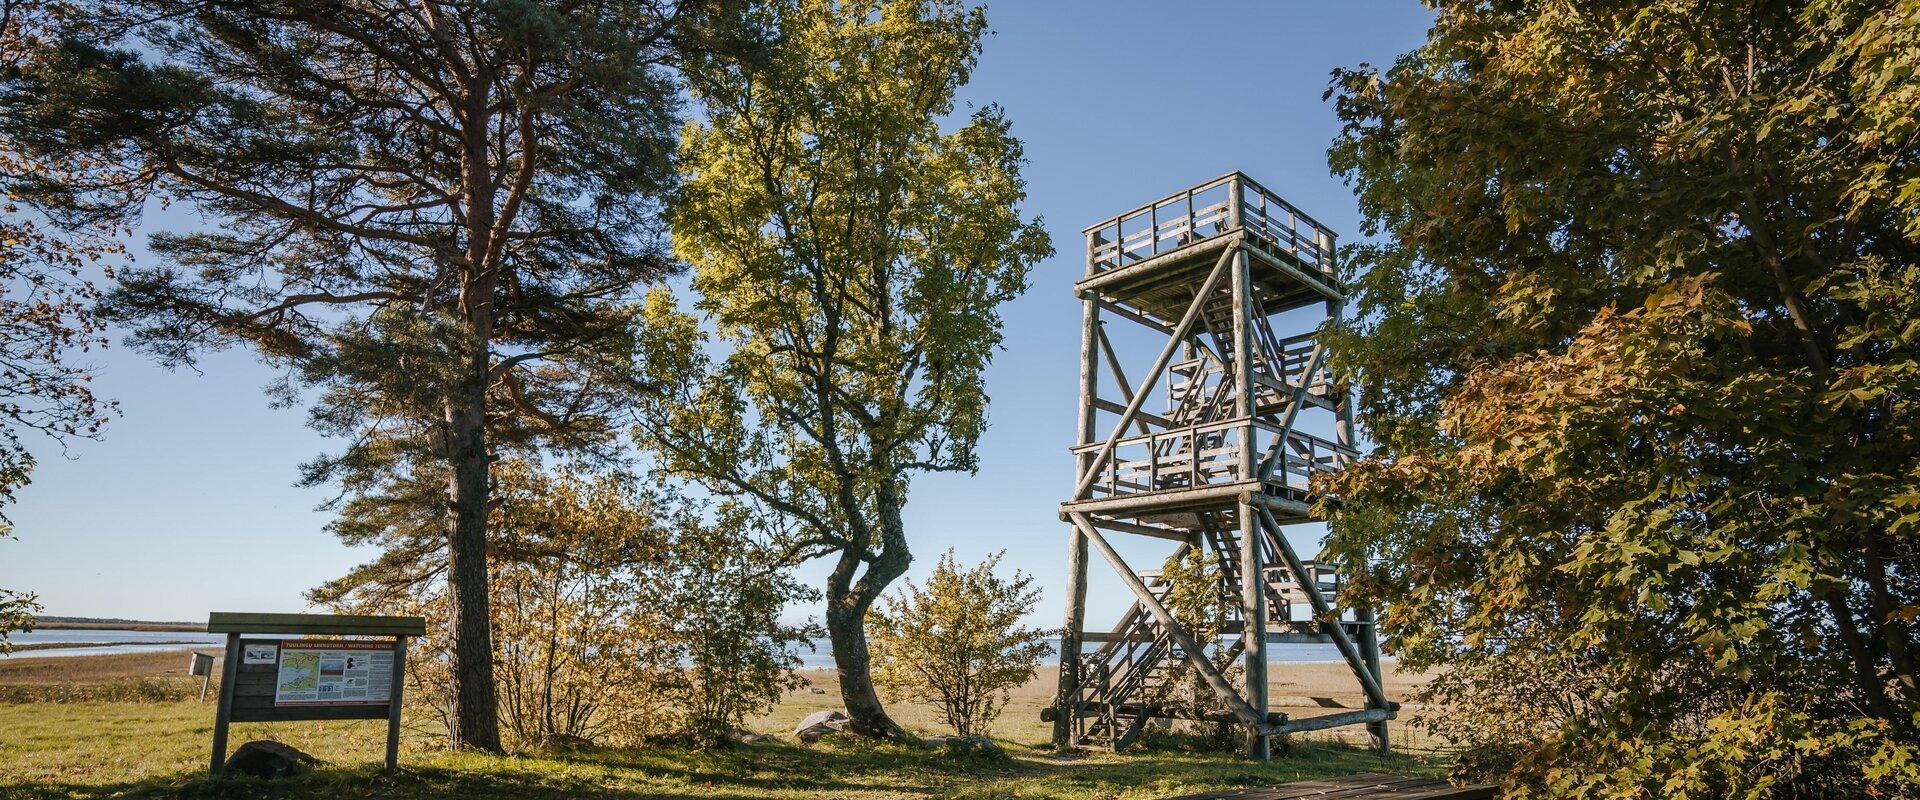 The Haeska birdwatching tower on the north shore of Matsalu Bay is the best one in Europe – the coastal meadows and shallow bay are a popular spot amo